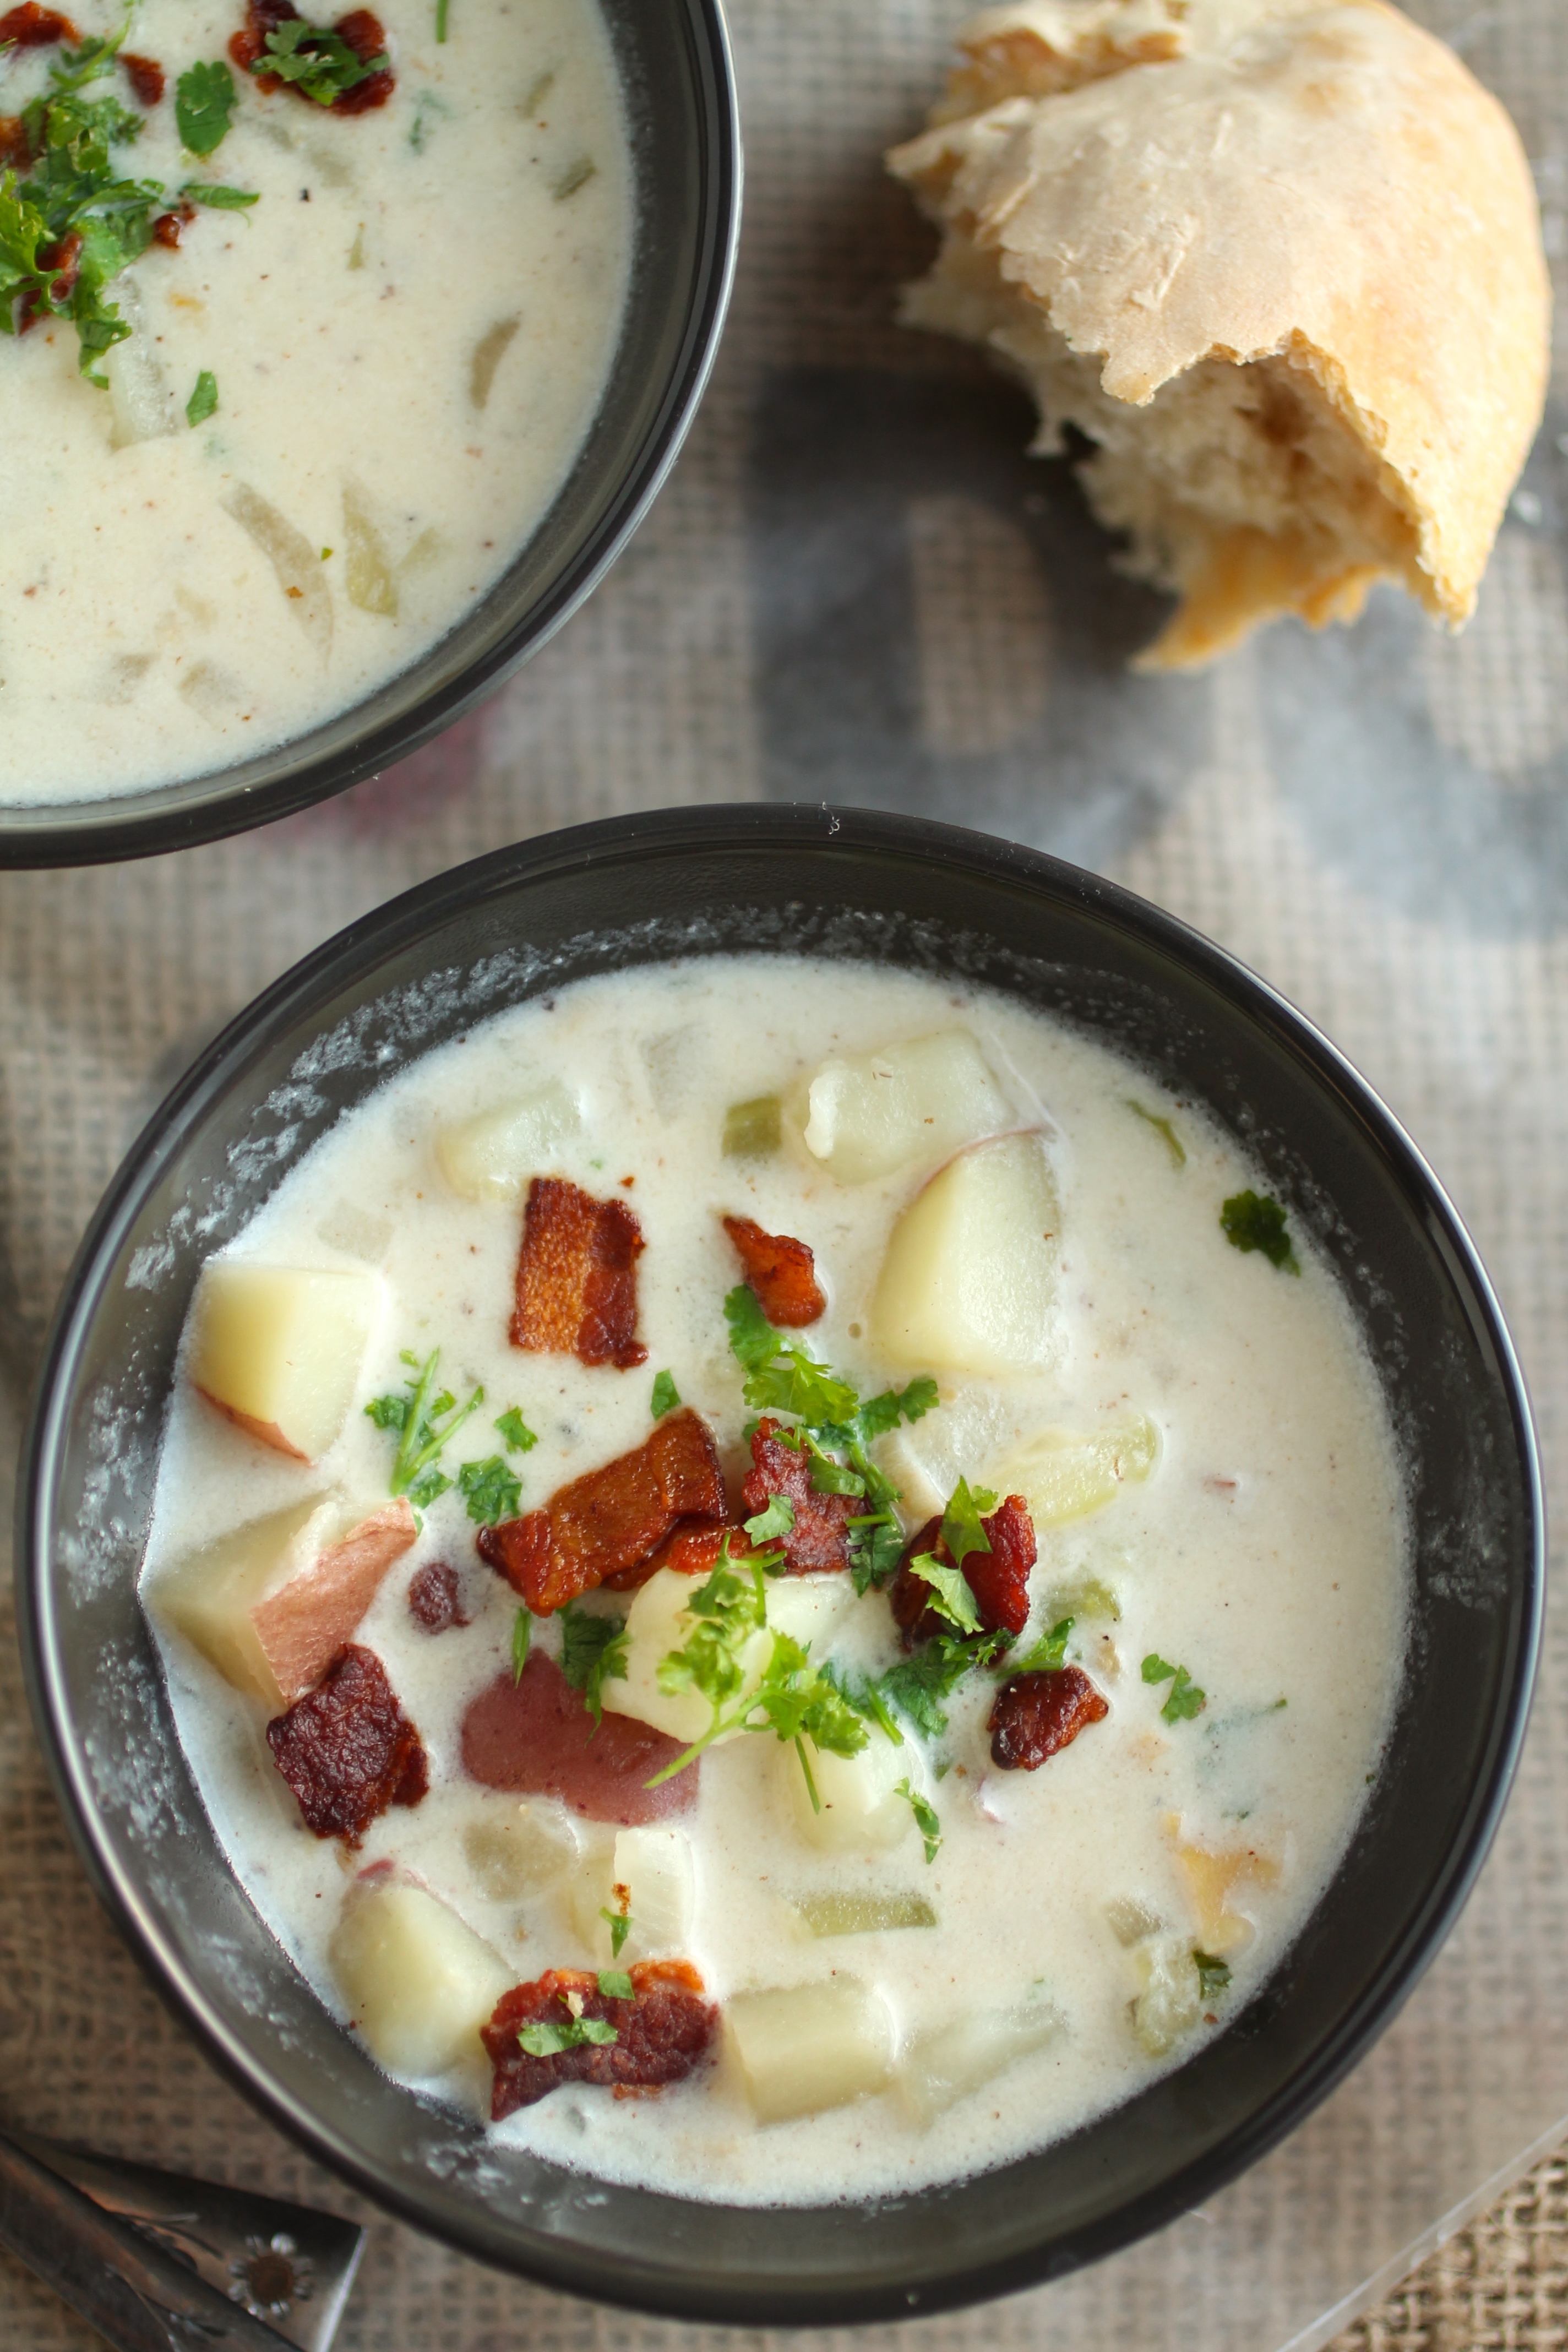 Aerial view of a black bowl filled with clam chowder, topped with crispy bacon and fresh parsley.